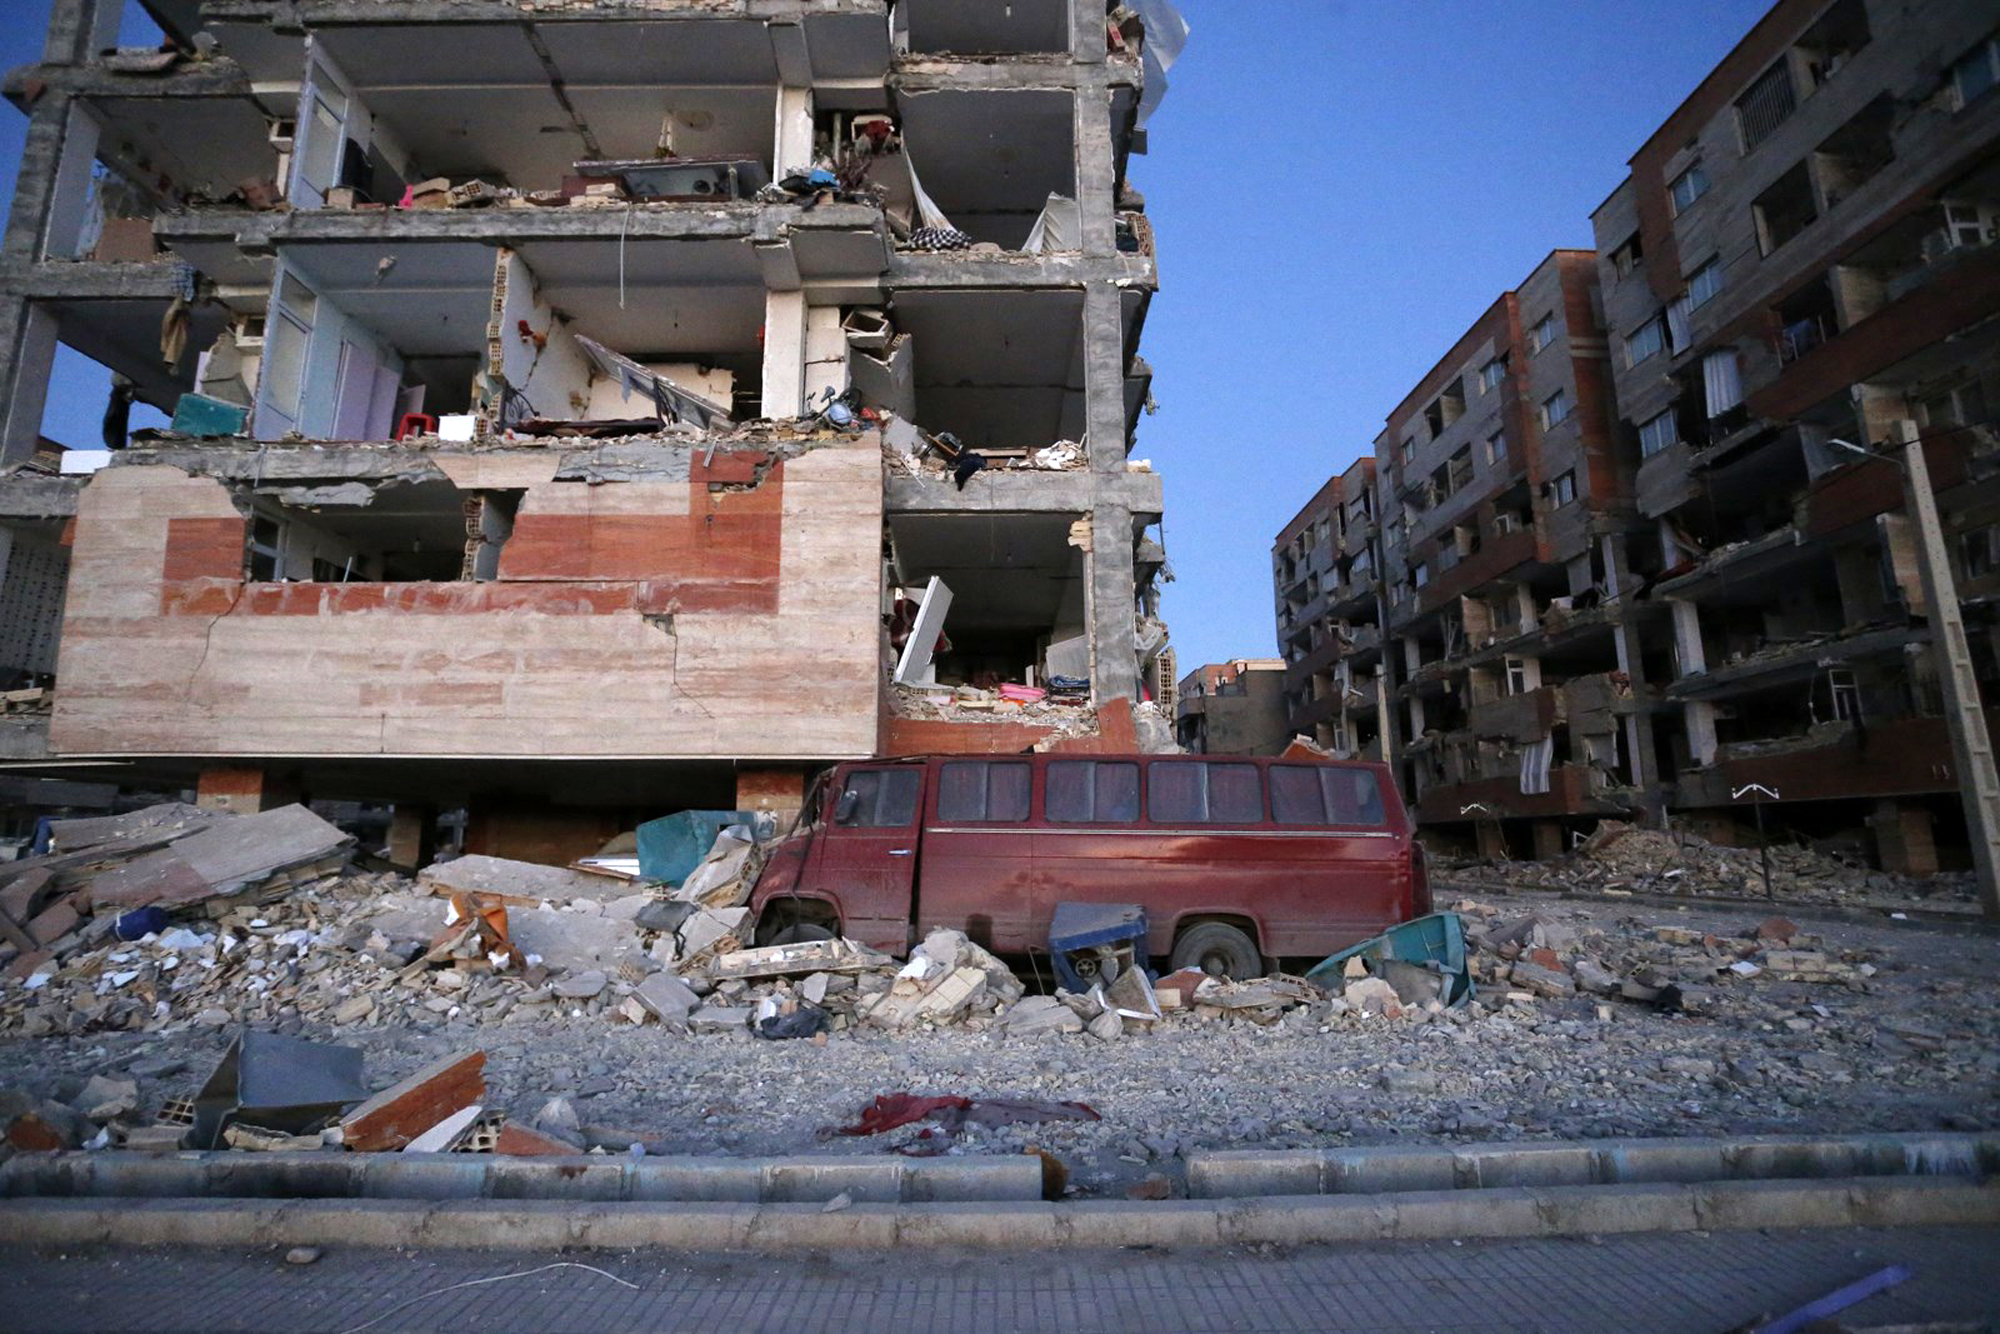 <div class='meta'><div class='origin-logo' data-origin='none'></div><span class='caption-text' data-credit='Pouria Pakizeh/ISNA via AP'>In this photo provided by the ISNA, destroyed buildings and a car are seen after an earthquake at the city of Sarpol-e-Zahab in western Iran, Monday, Nov. 13, 2017.</span></div>